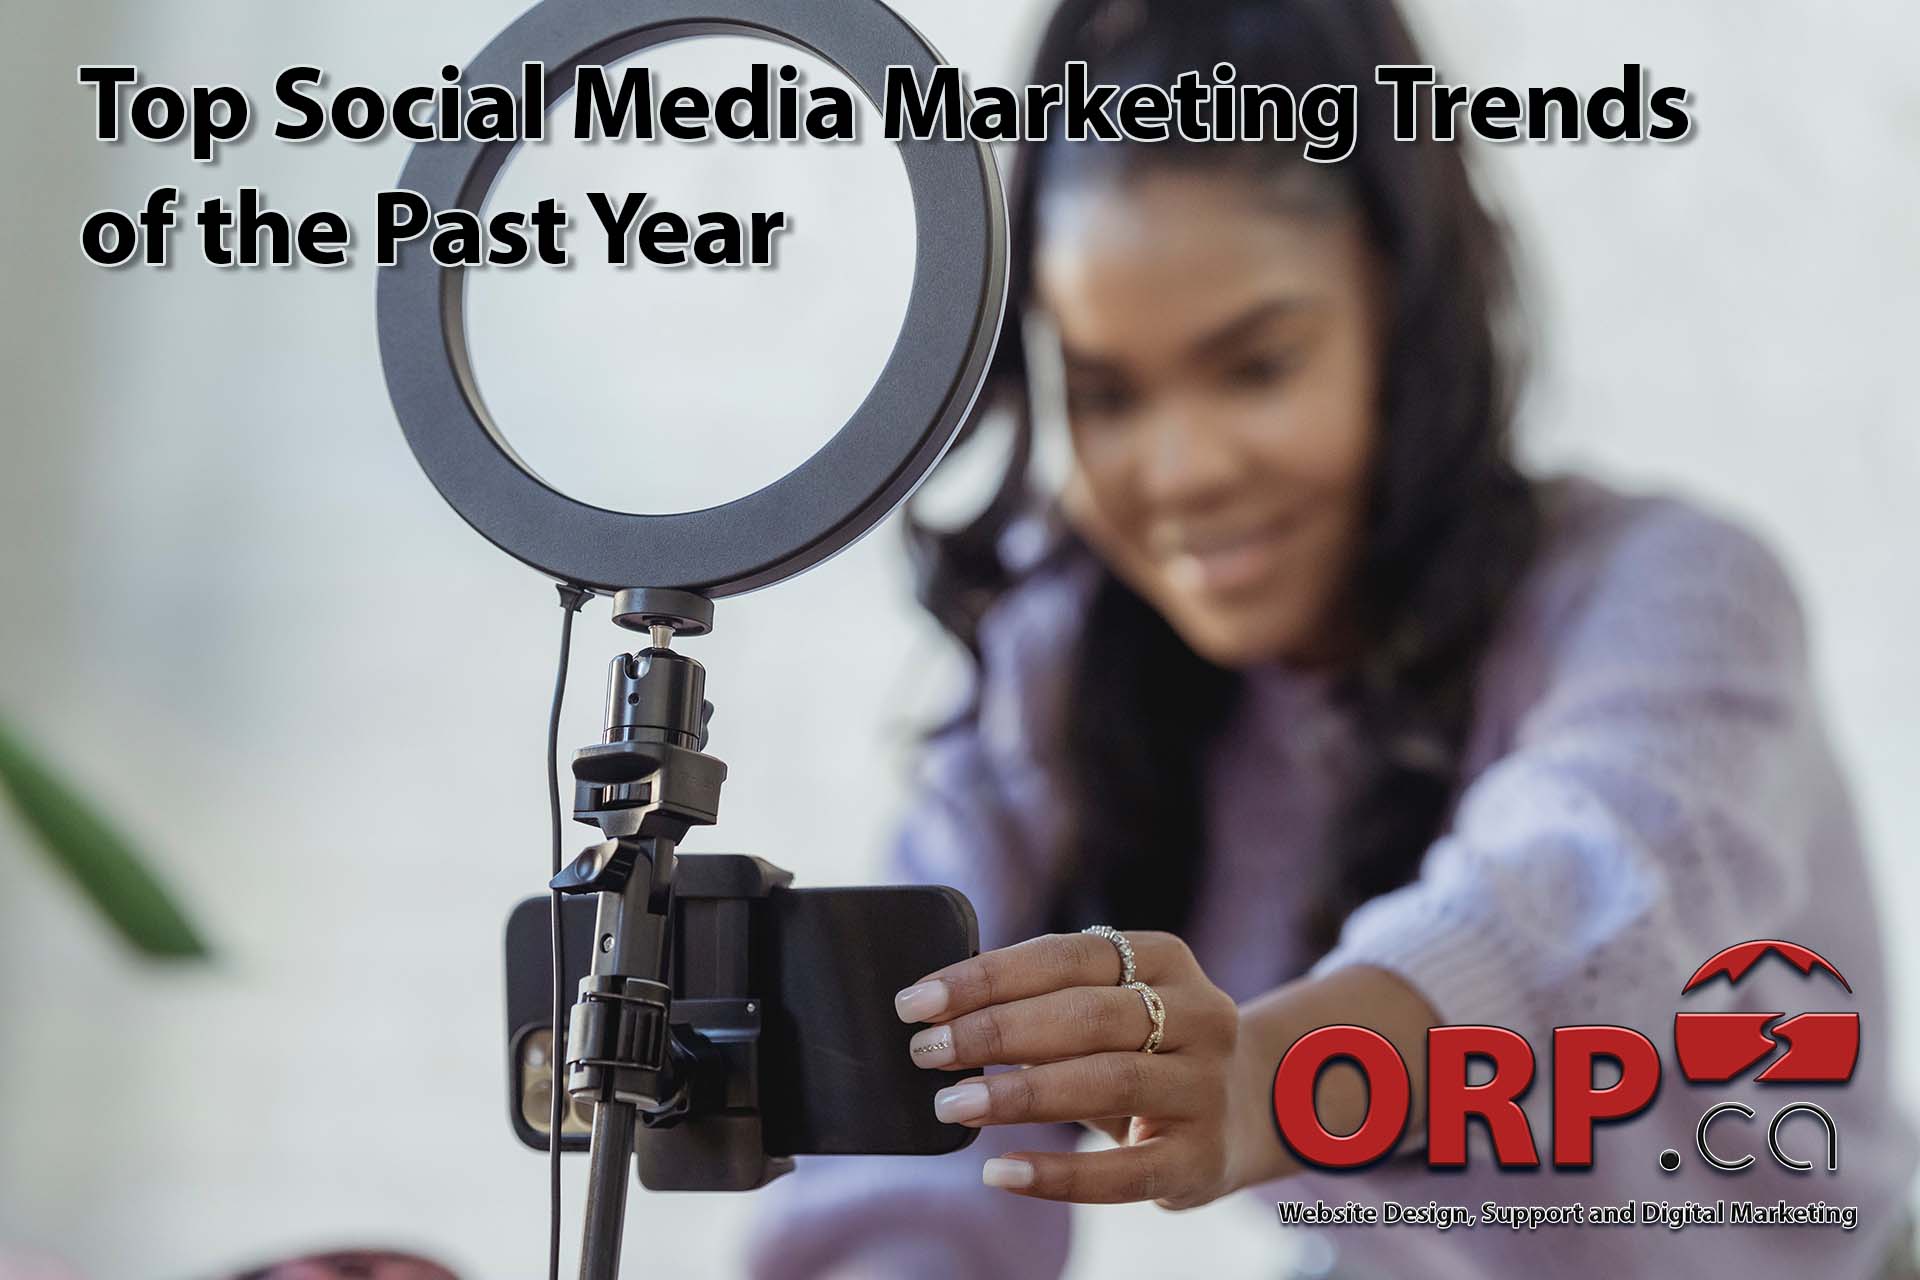 Top Social Media Marketing Trends of the Past Year a small business website design and social media marketing article from ORP.ca. Working with small businesses, rural communities and NGOs since 2003.